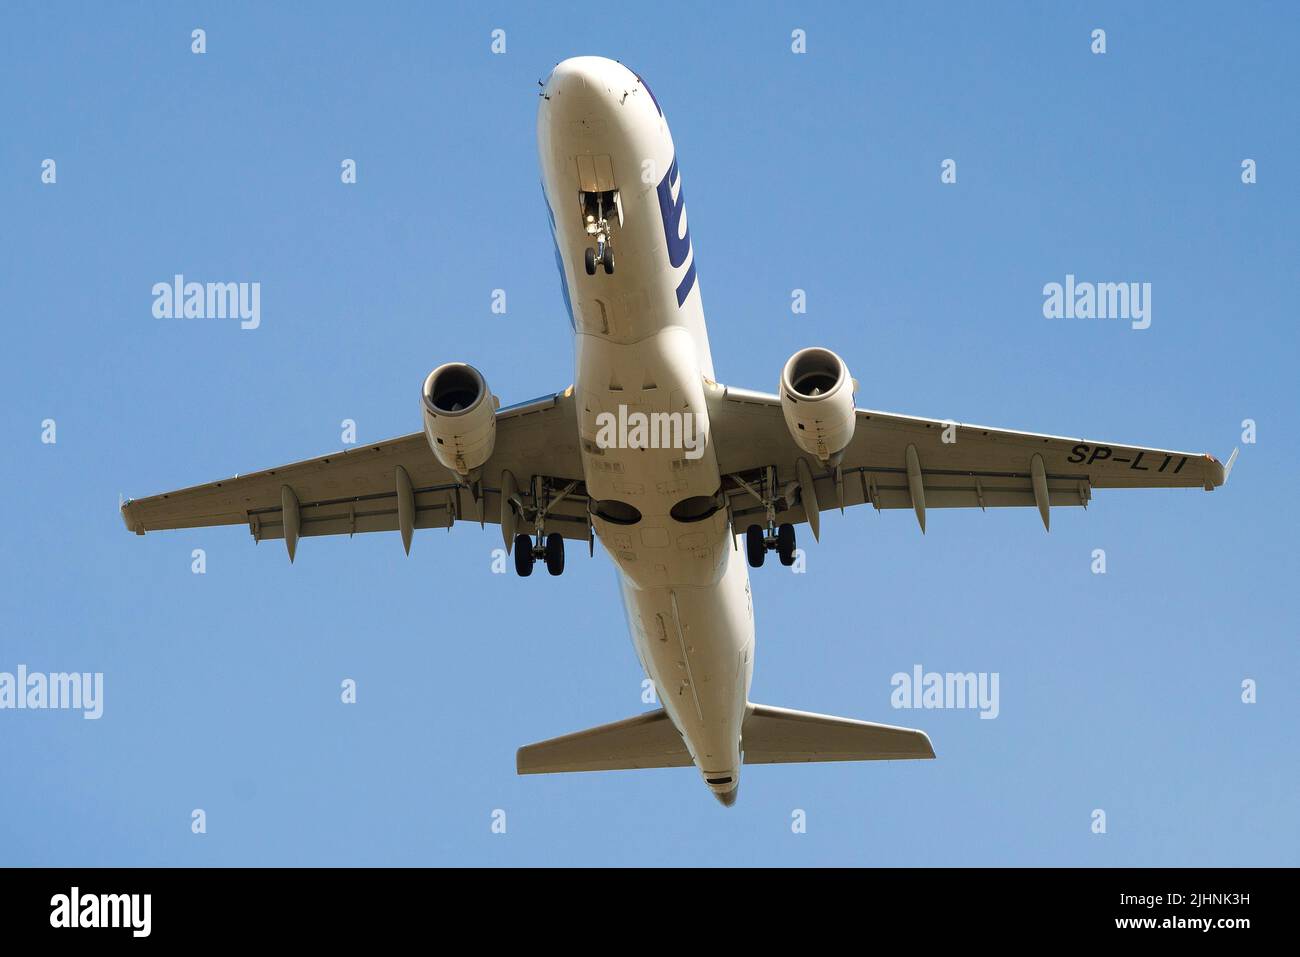 SAINT PETERSBURG, RUSSIA - JUNE 20, 2018: Aircraft Embraer ERJ-175 (SP-LII) of LOT - Polish Airlines flies overhead in a blue cloudless sky Stock Photo